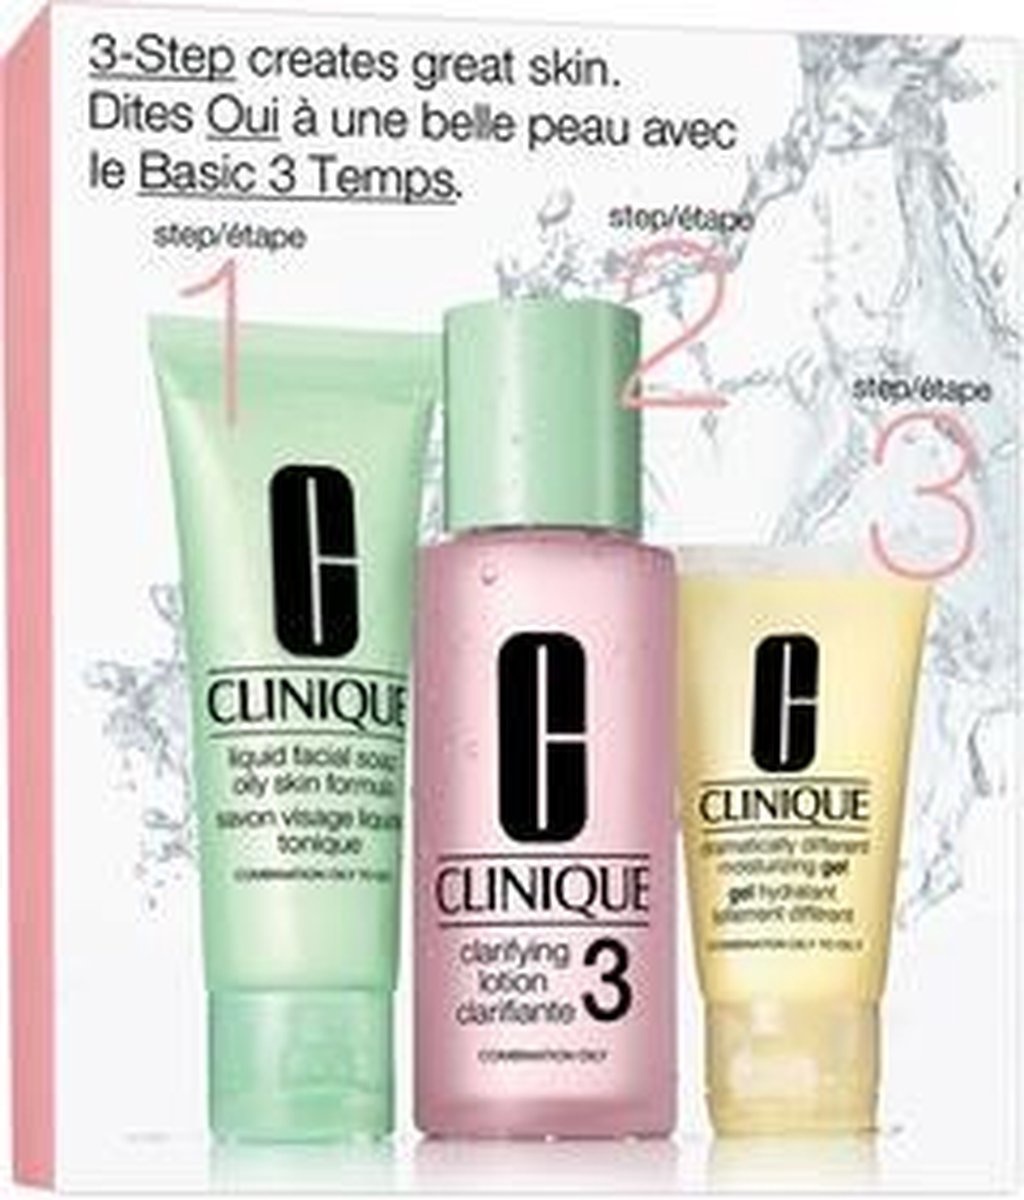 Clinique 3-Step Introduction Kit Skin Type 3 - Skin Care Gift Set